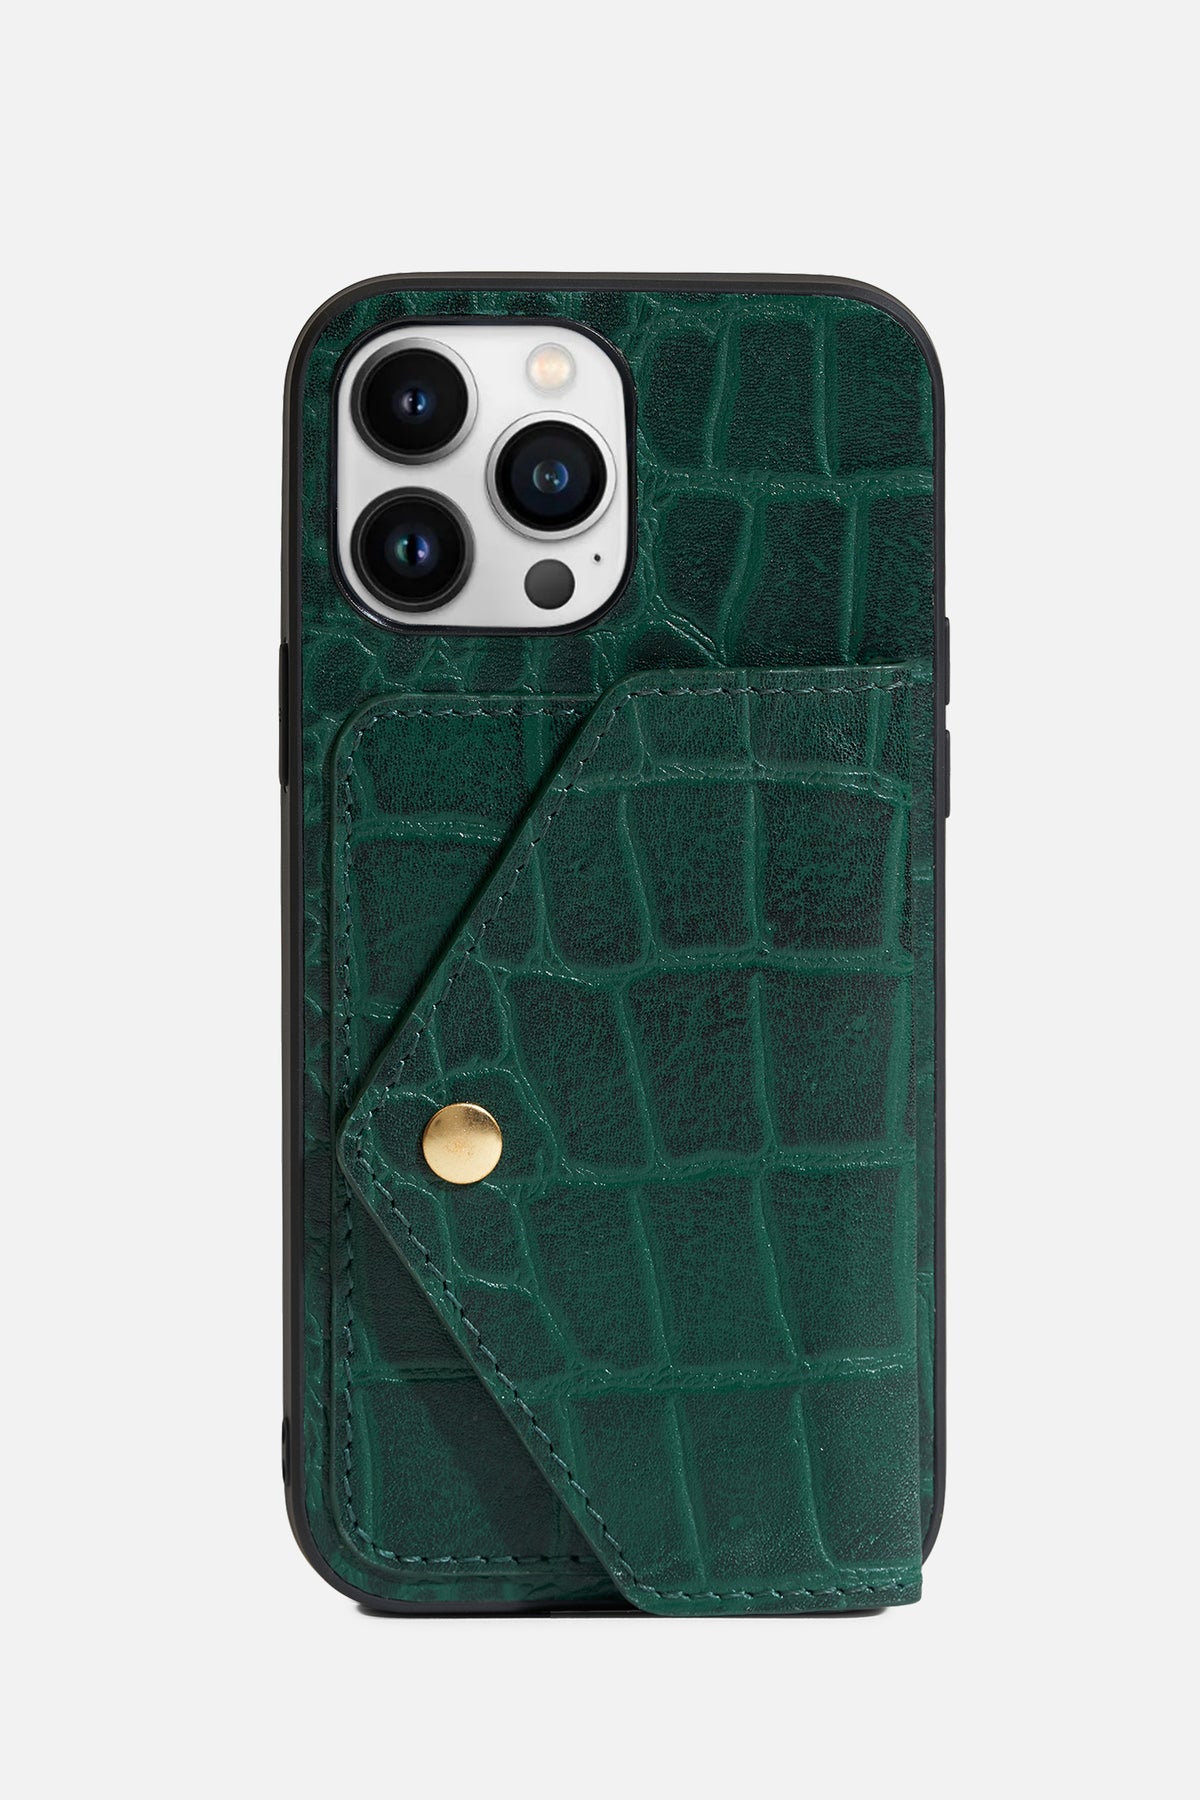 IPHONE CASE WITH FLAP POCKET - CROCO LEATHER  - FOREST GREEN